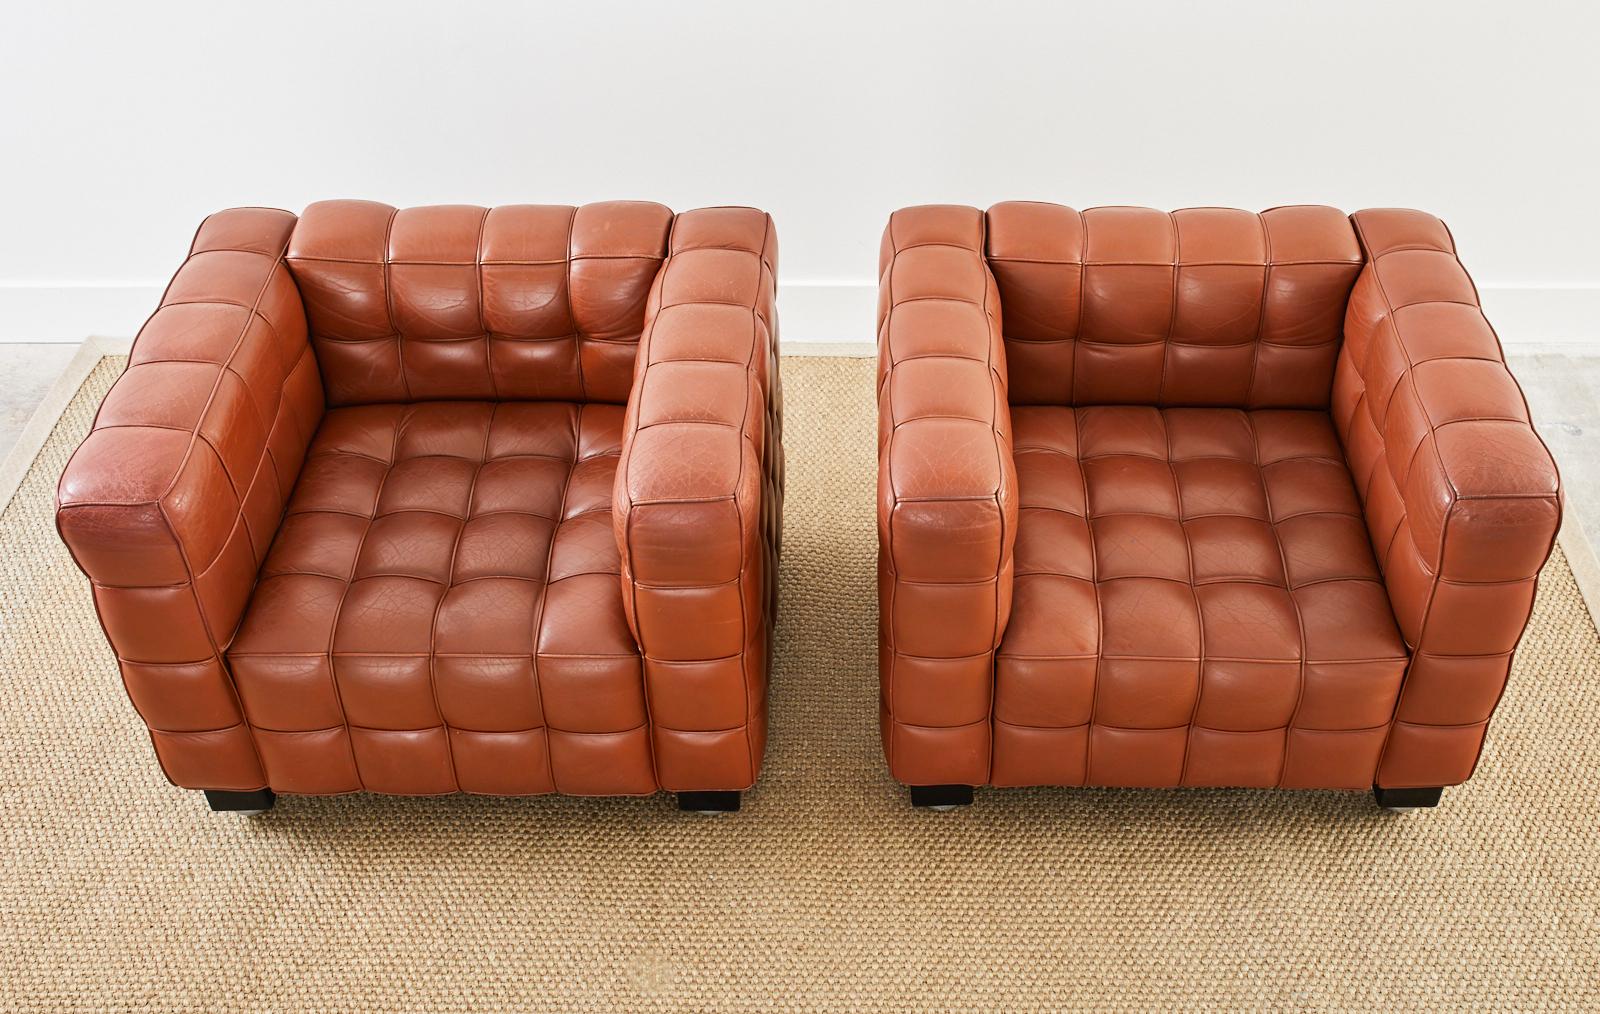 Austrian Pair of Josef Hoffmann Leather Kubus Armchairs by Wittmann For Sale